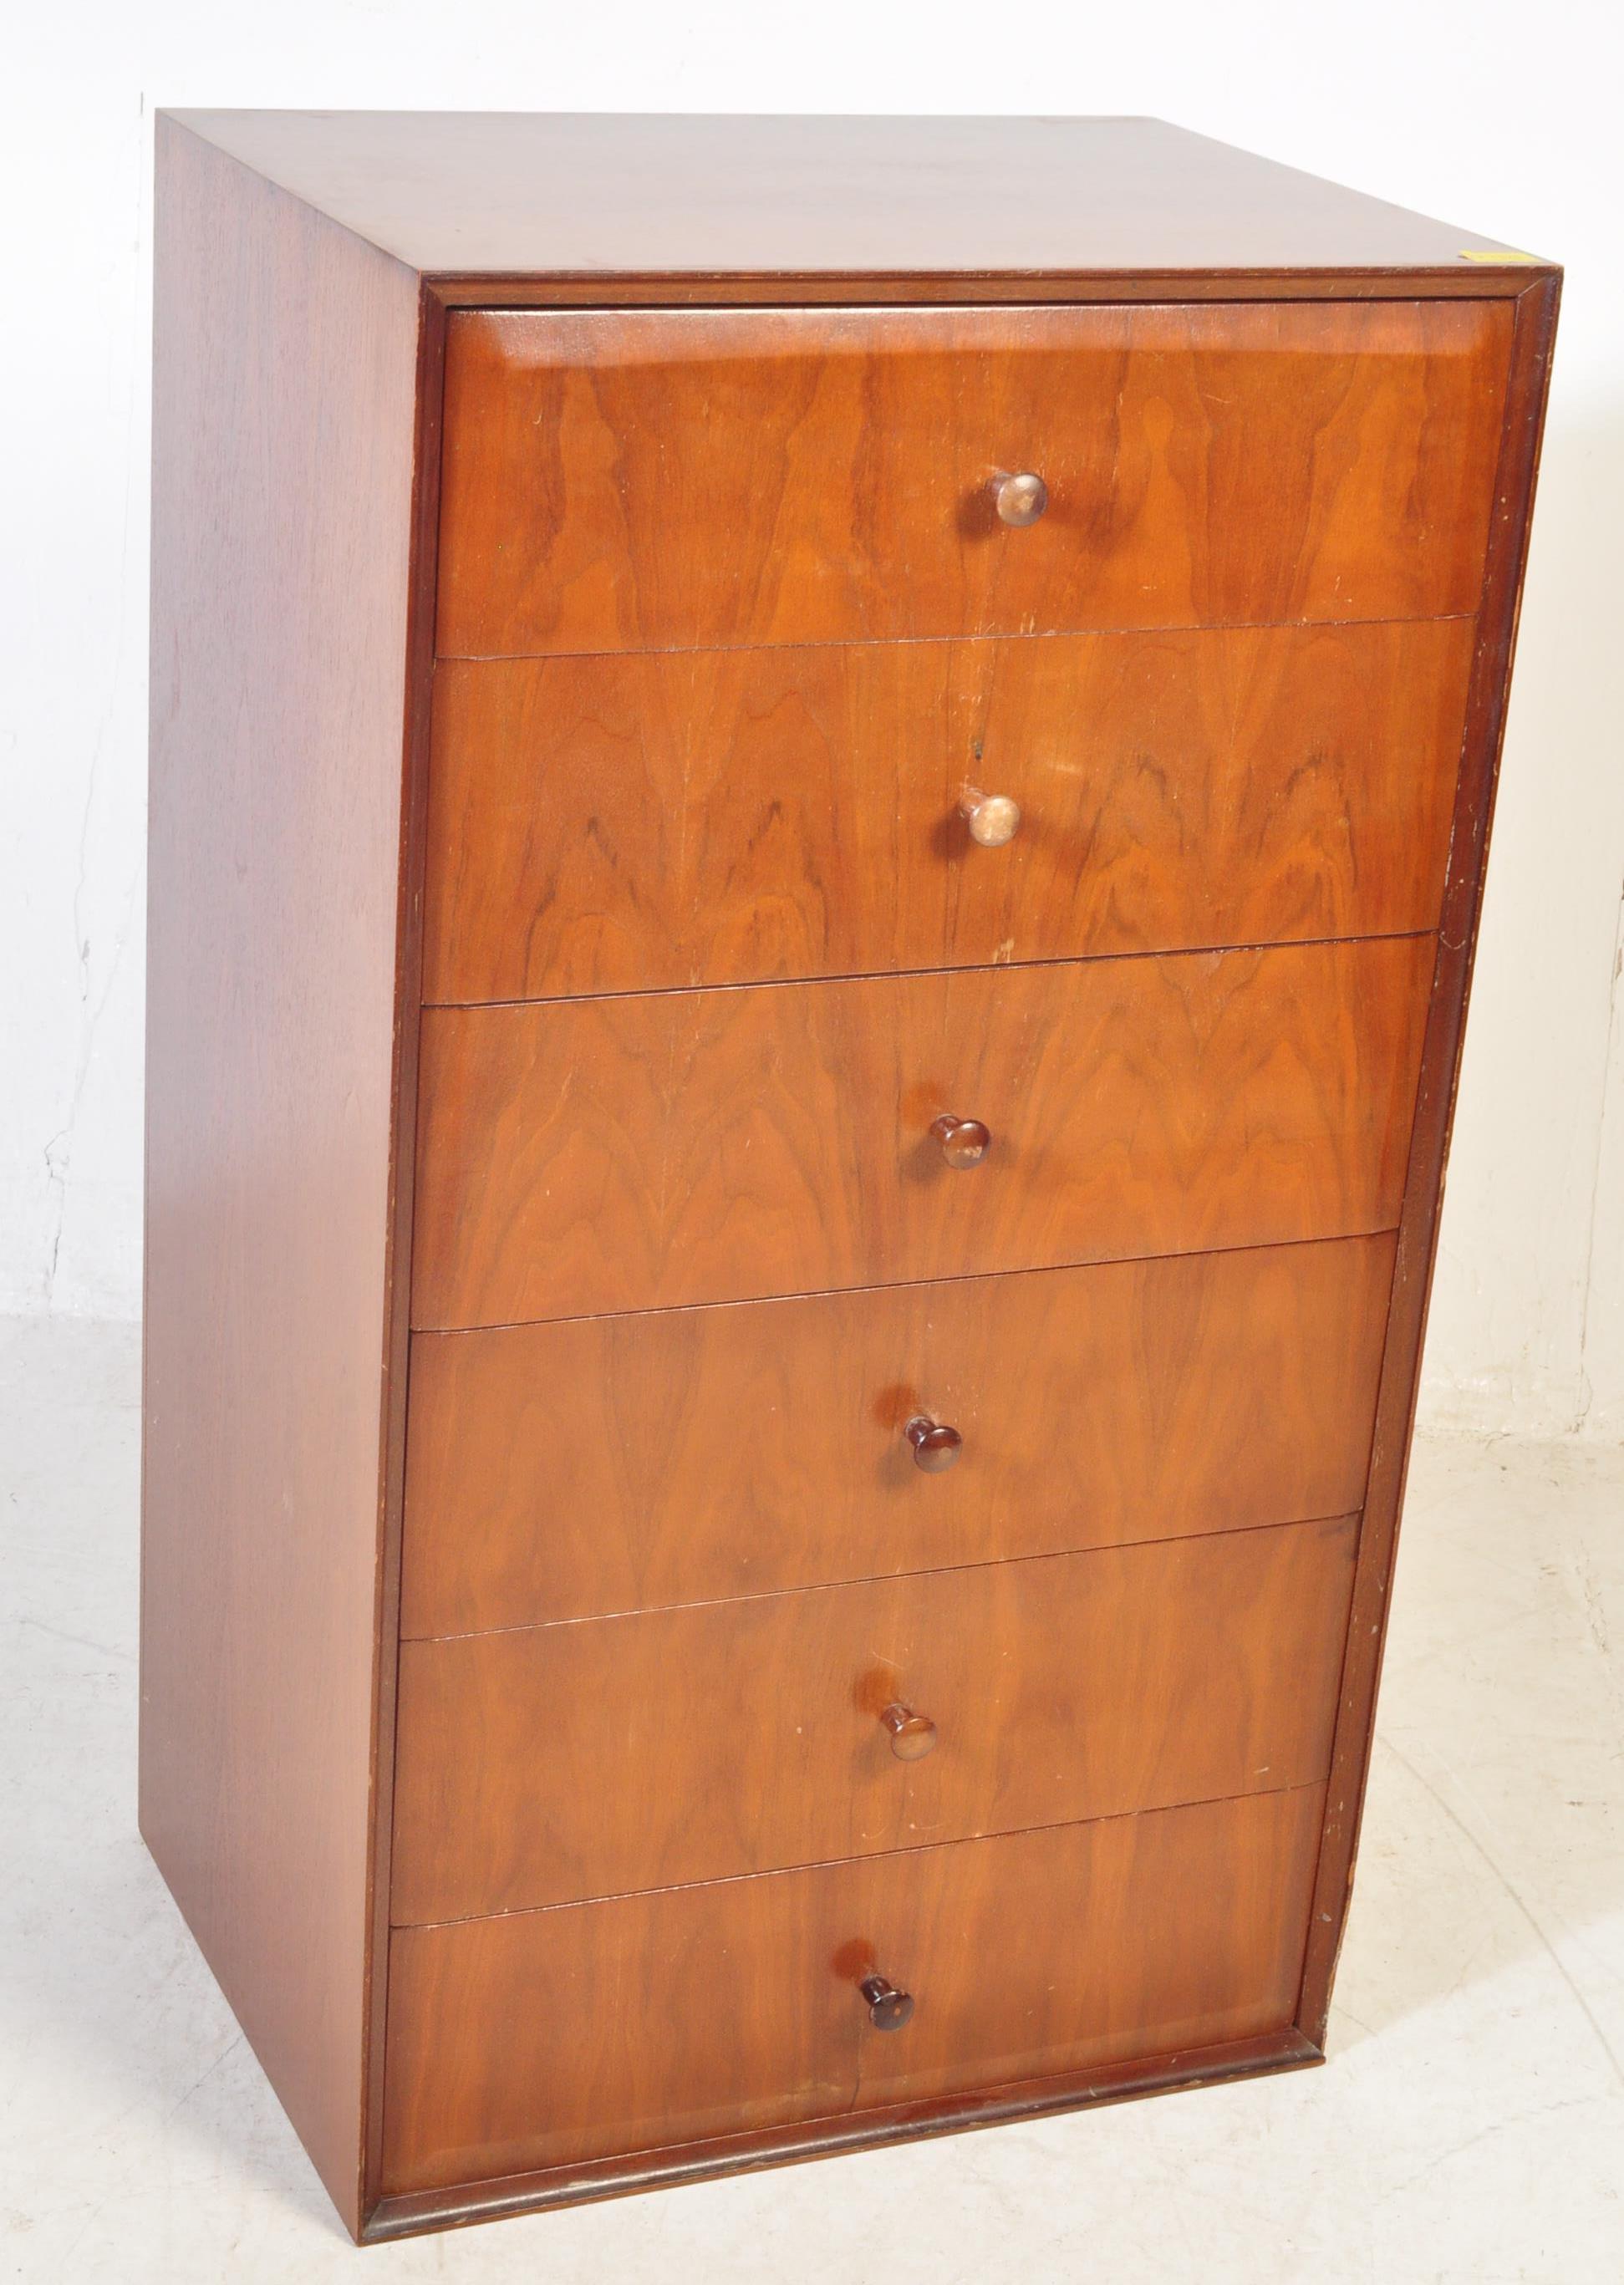 VINTAGE MEREDEW MAHOGANY CHEST OF DRAWERS - Image 2 of 7